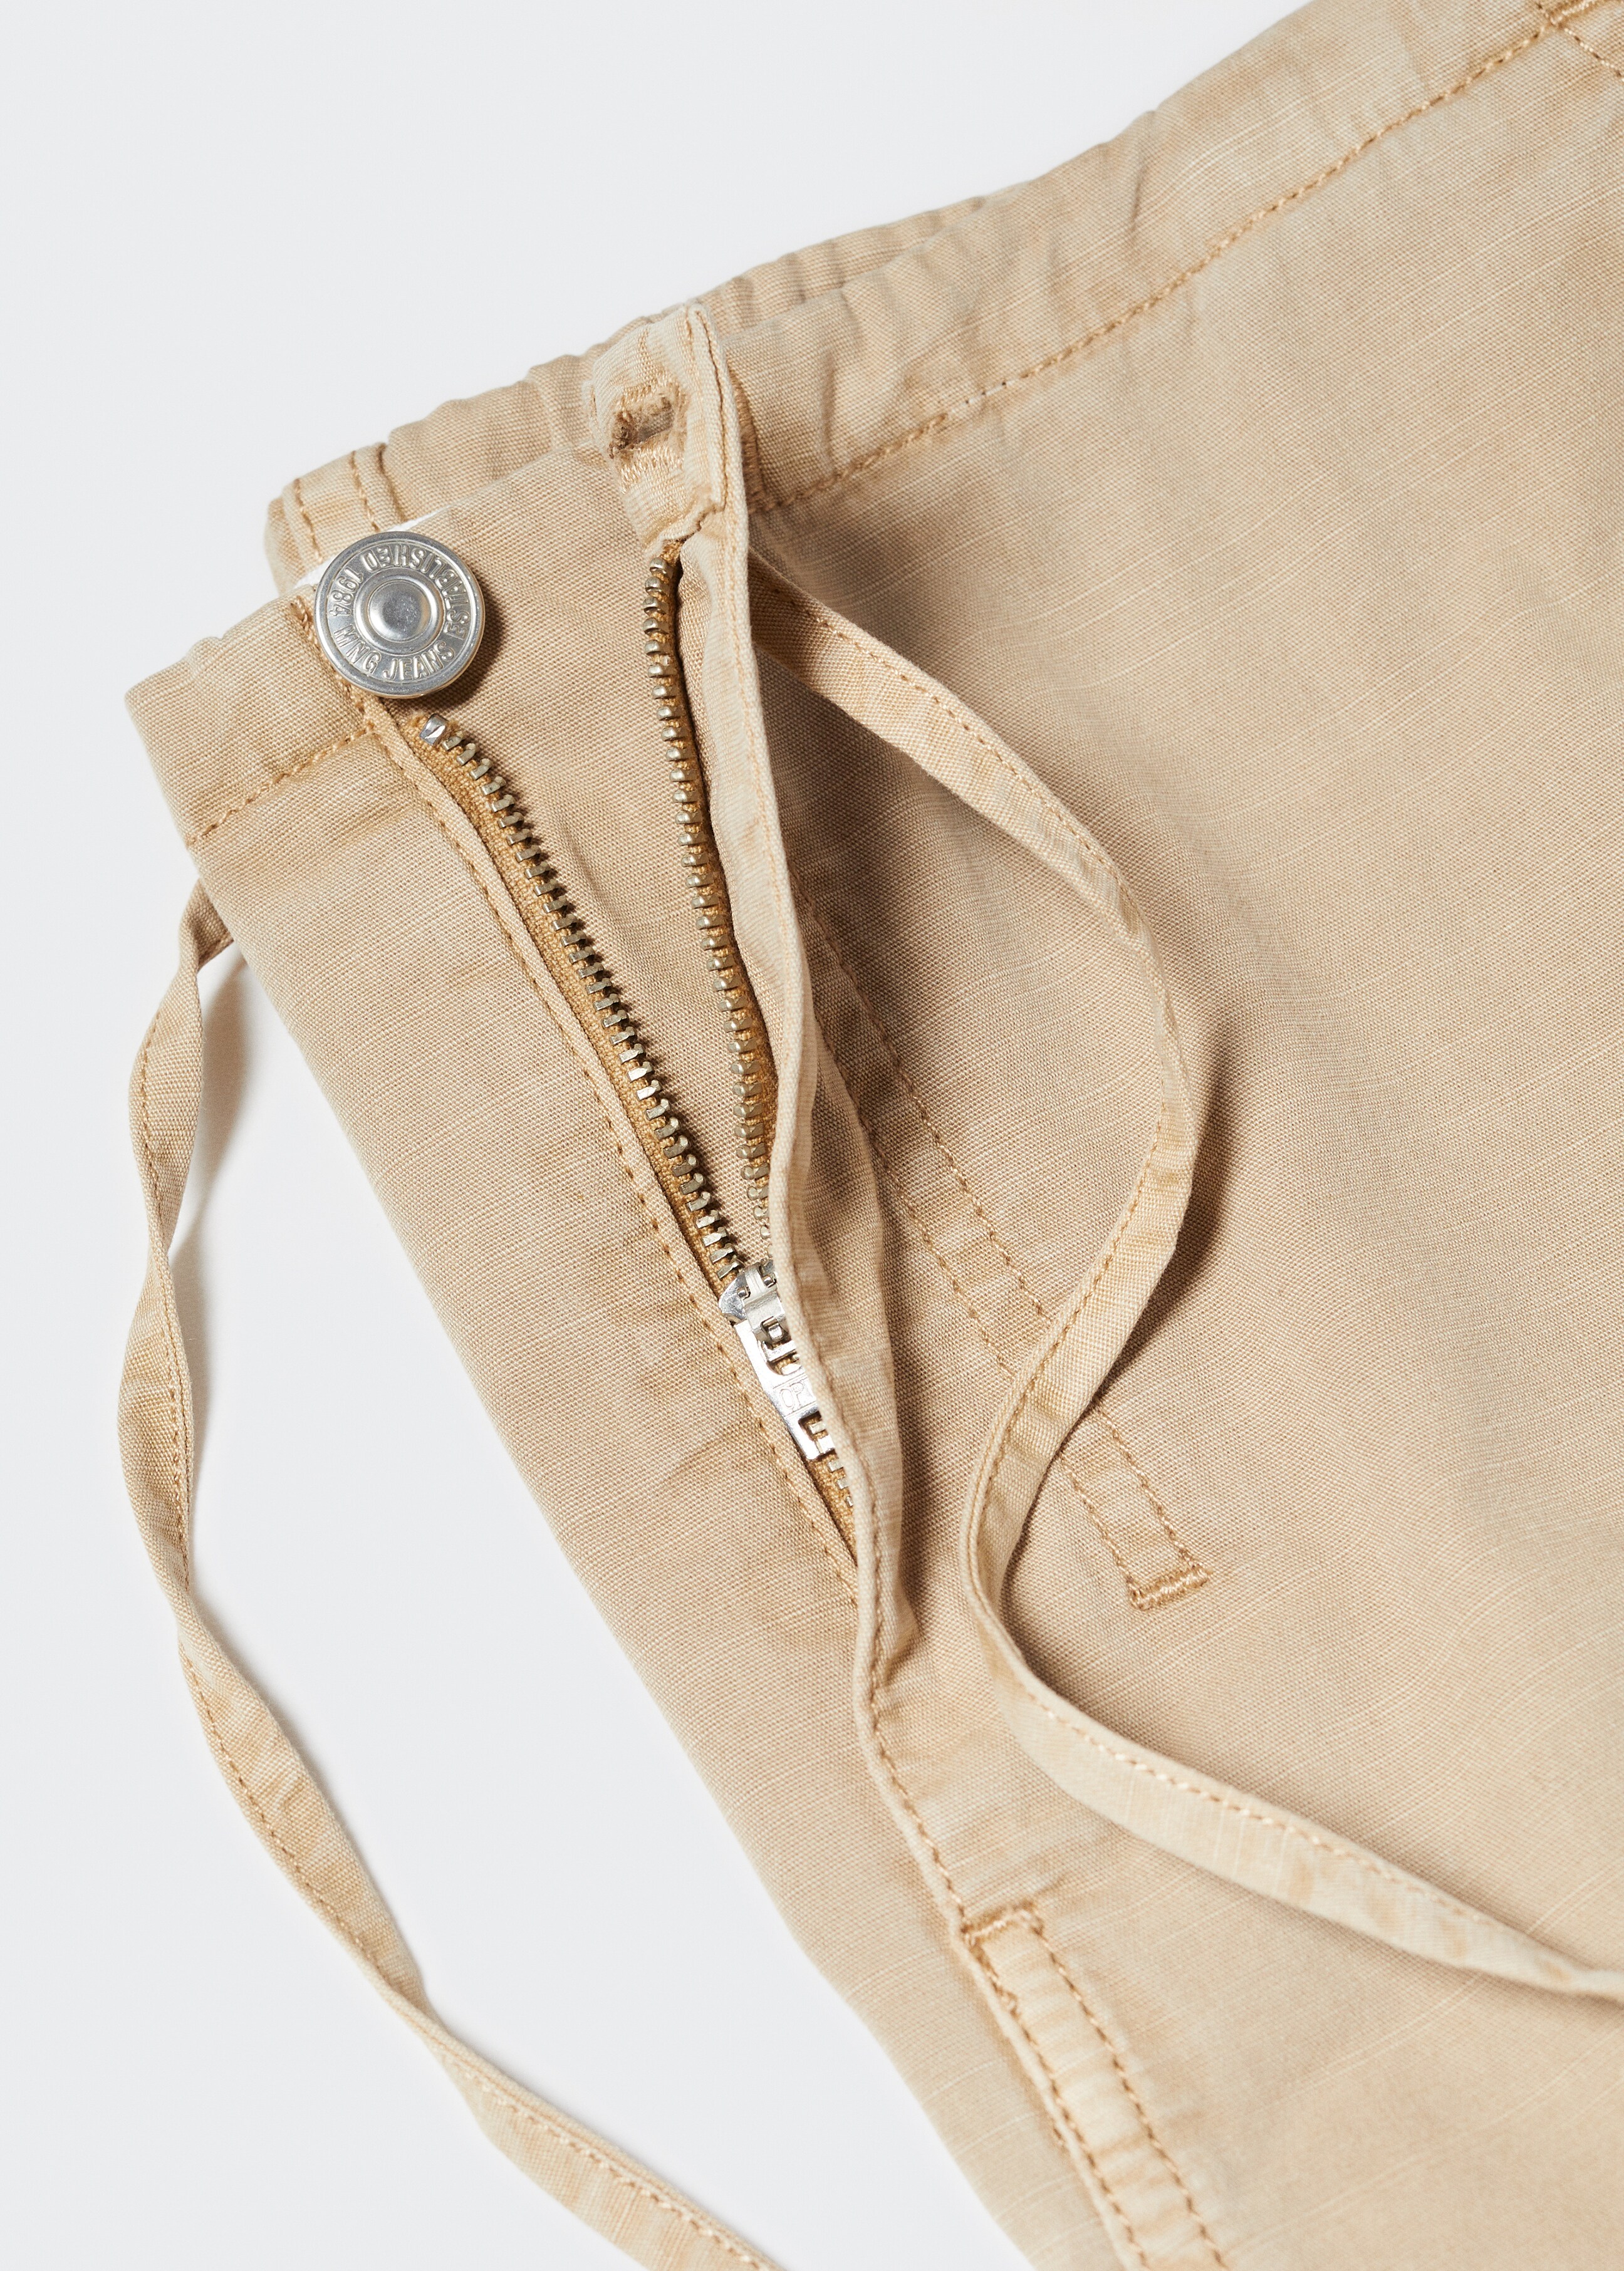 Parachute trousers - Details of the article 8